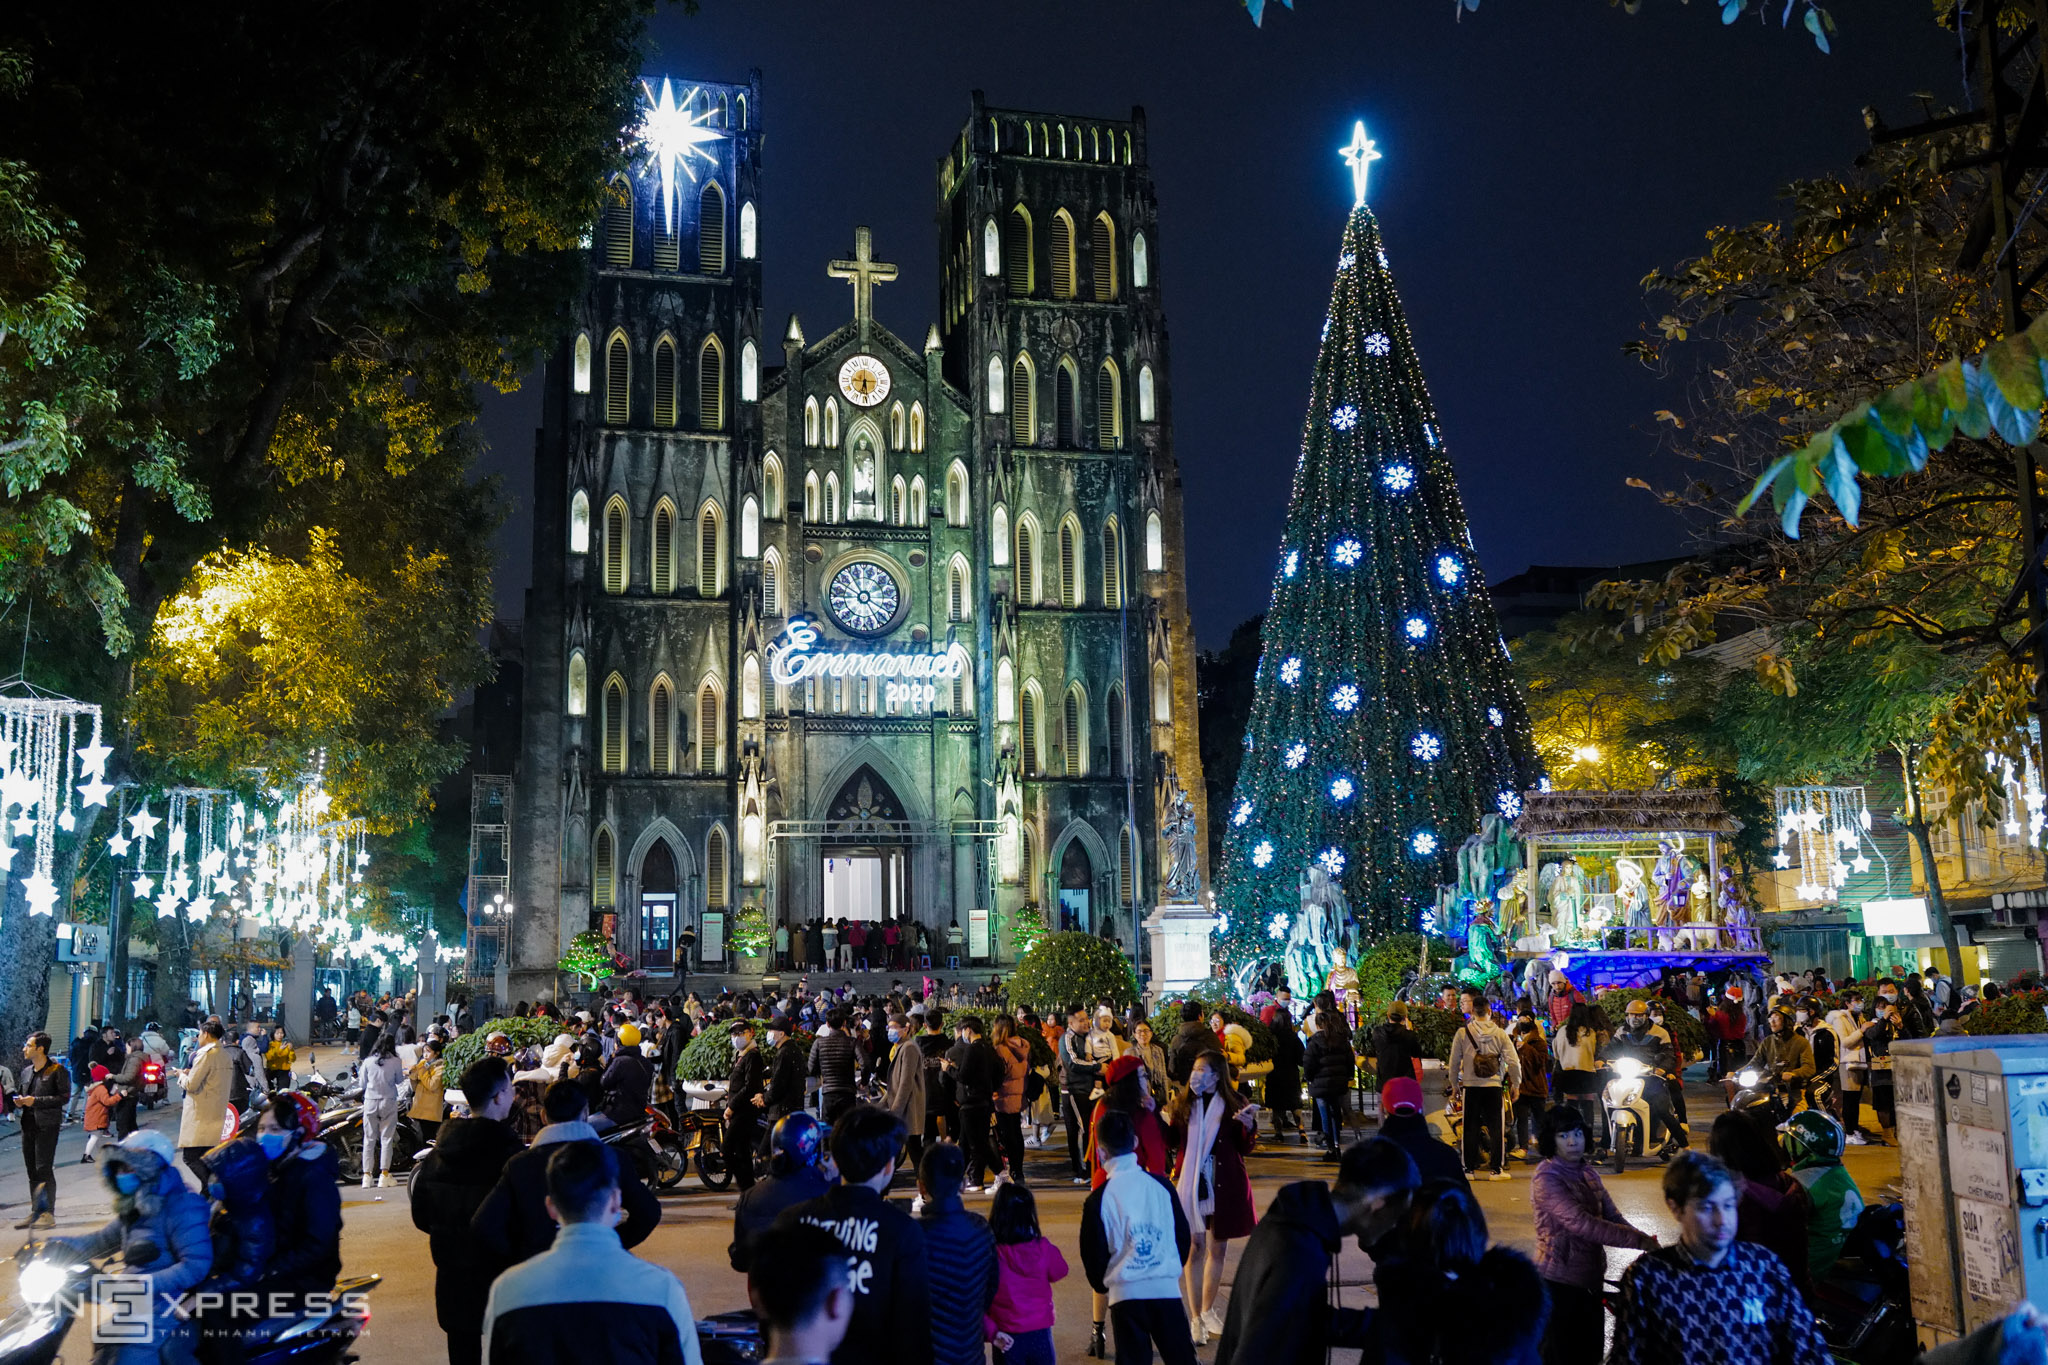 Churches across Vietnam get decked out for Xmas